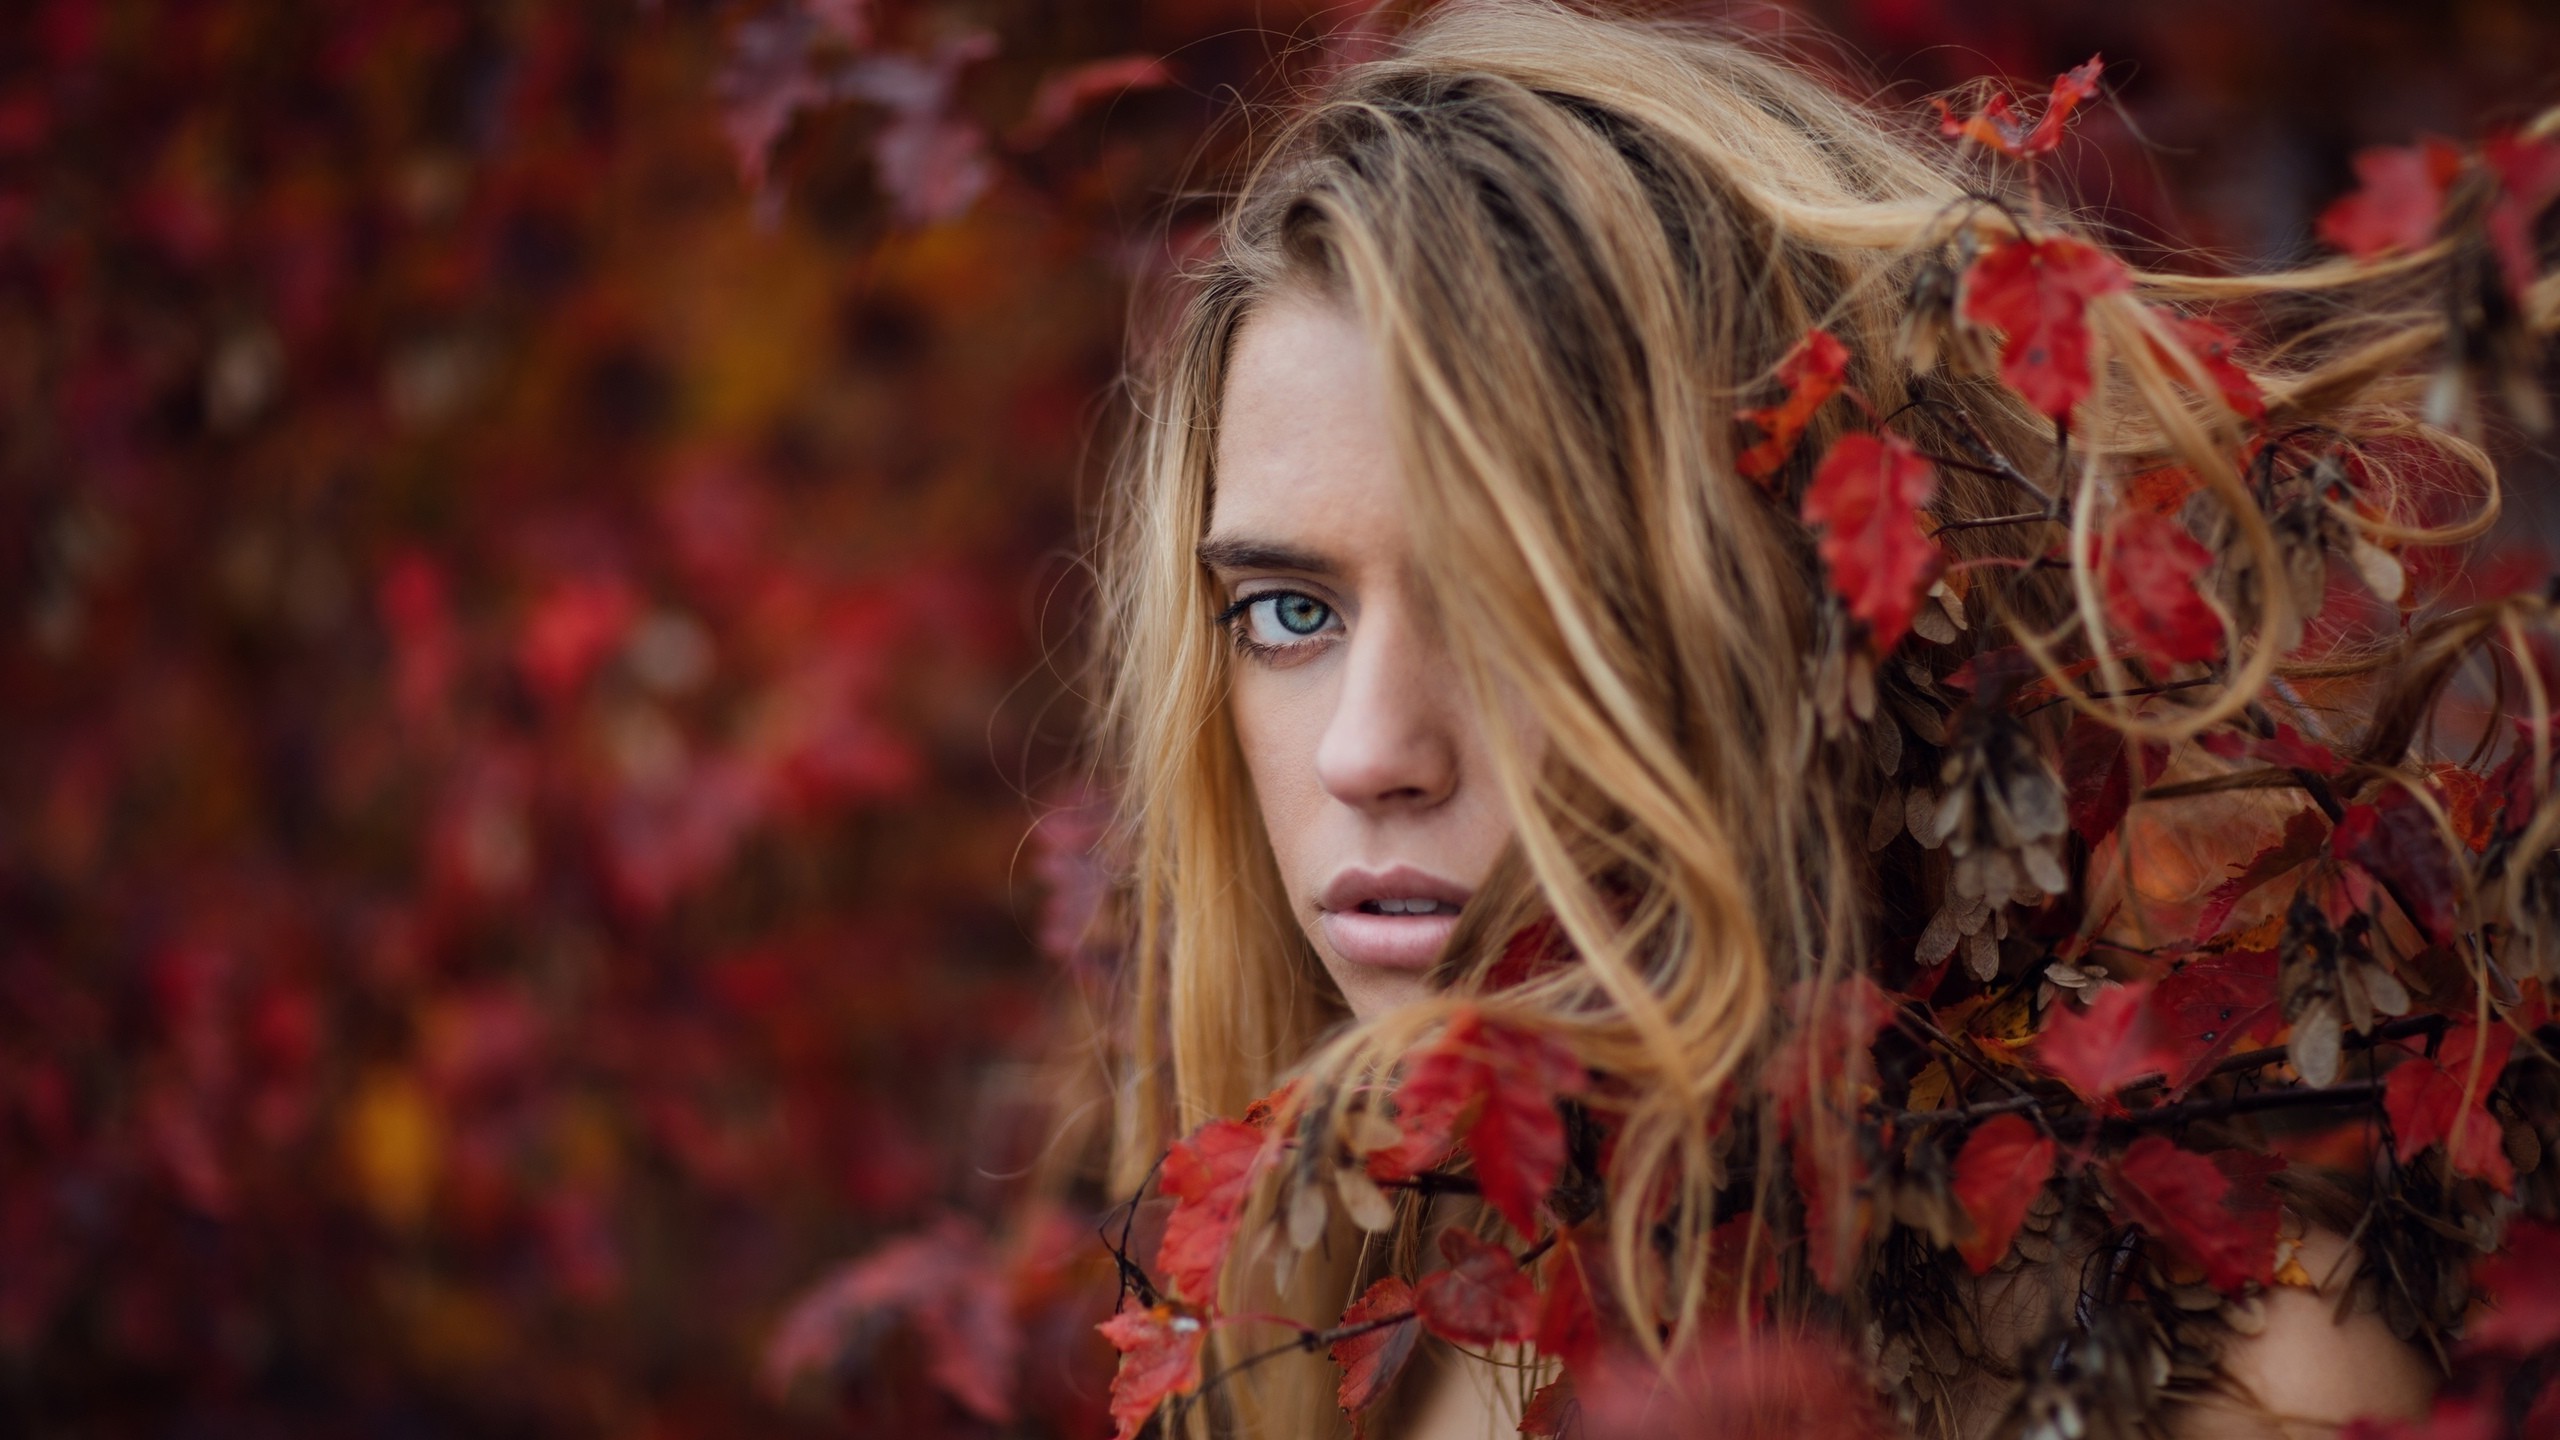 women, Model, Blonde, Long Hair, Women Outdoors, Looking At Viewer, Face, Portrait, Blue Eyes, Nature, Fall, Leaves, Open Mouth, Depth Of Field, Hair In Face, Branch Wallpaper